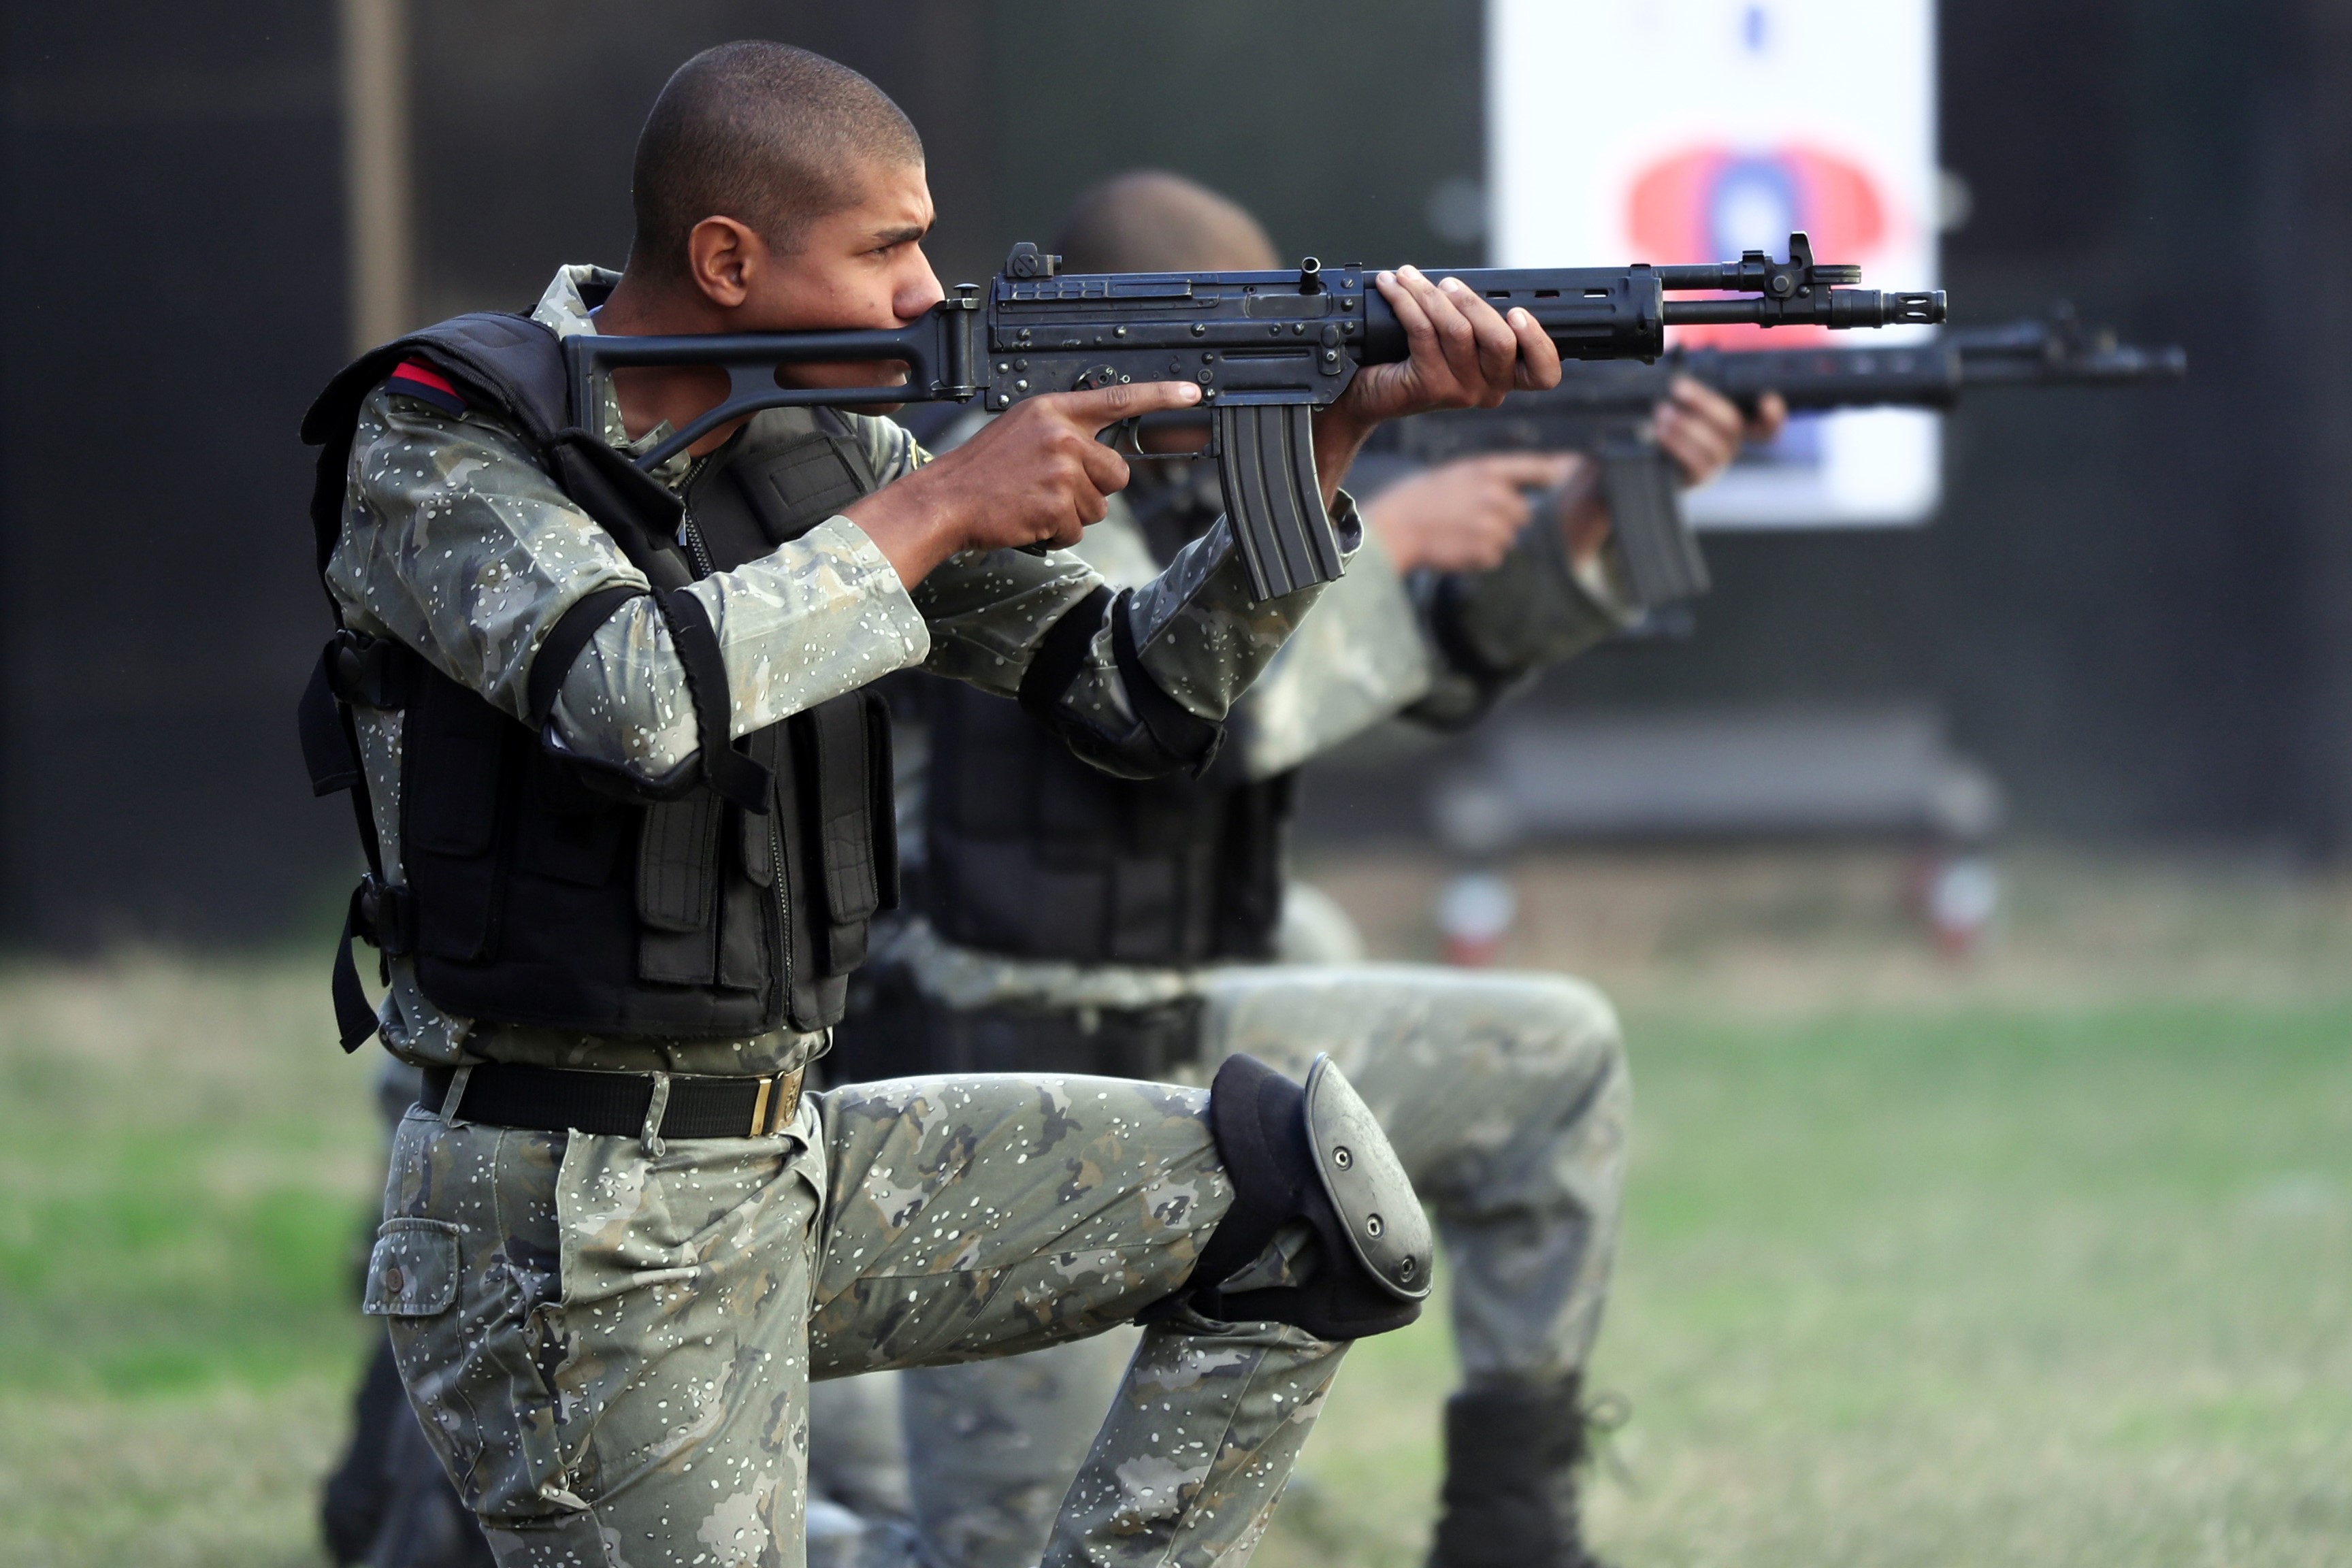 Egyptian police cadets take part in a training session at a police academy in the capital Cairo on December 30, 2019.